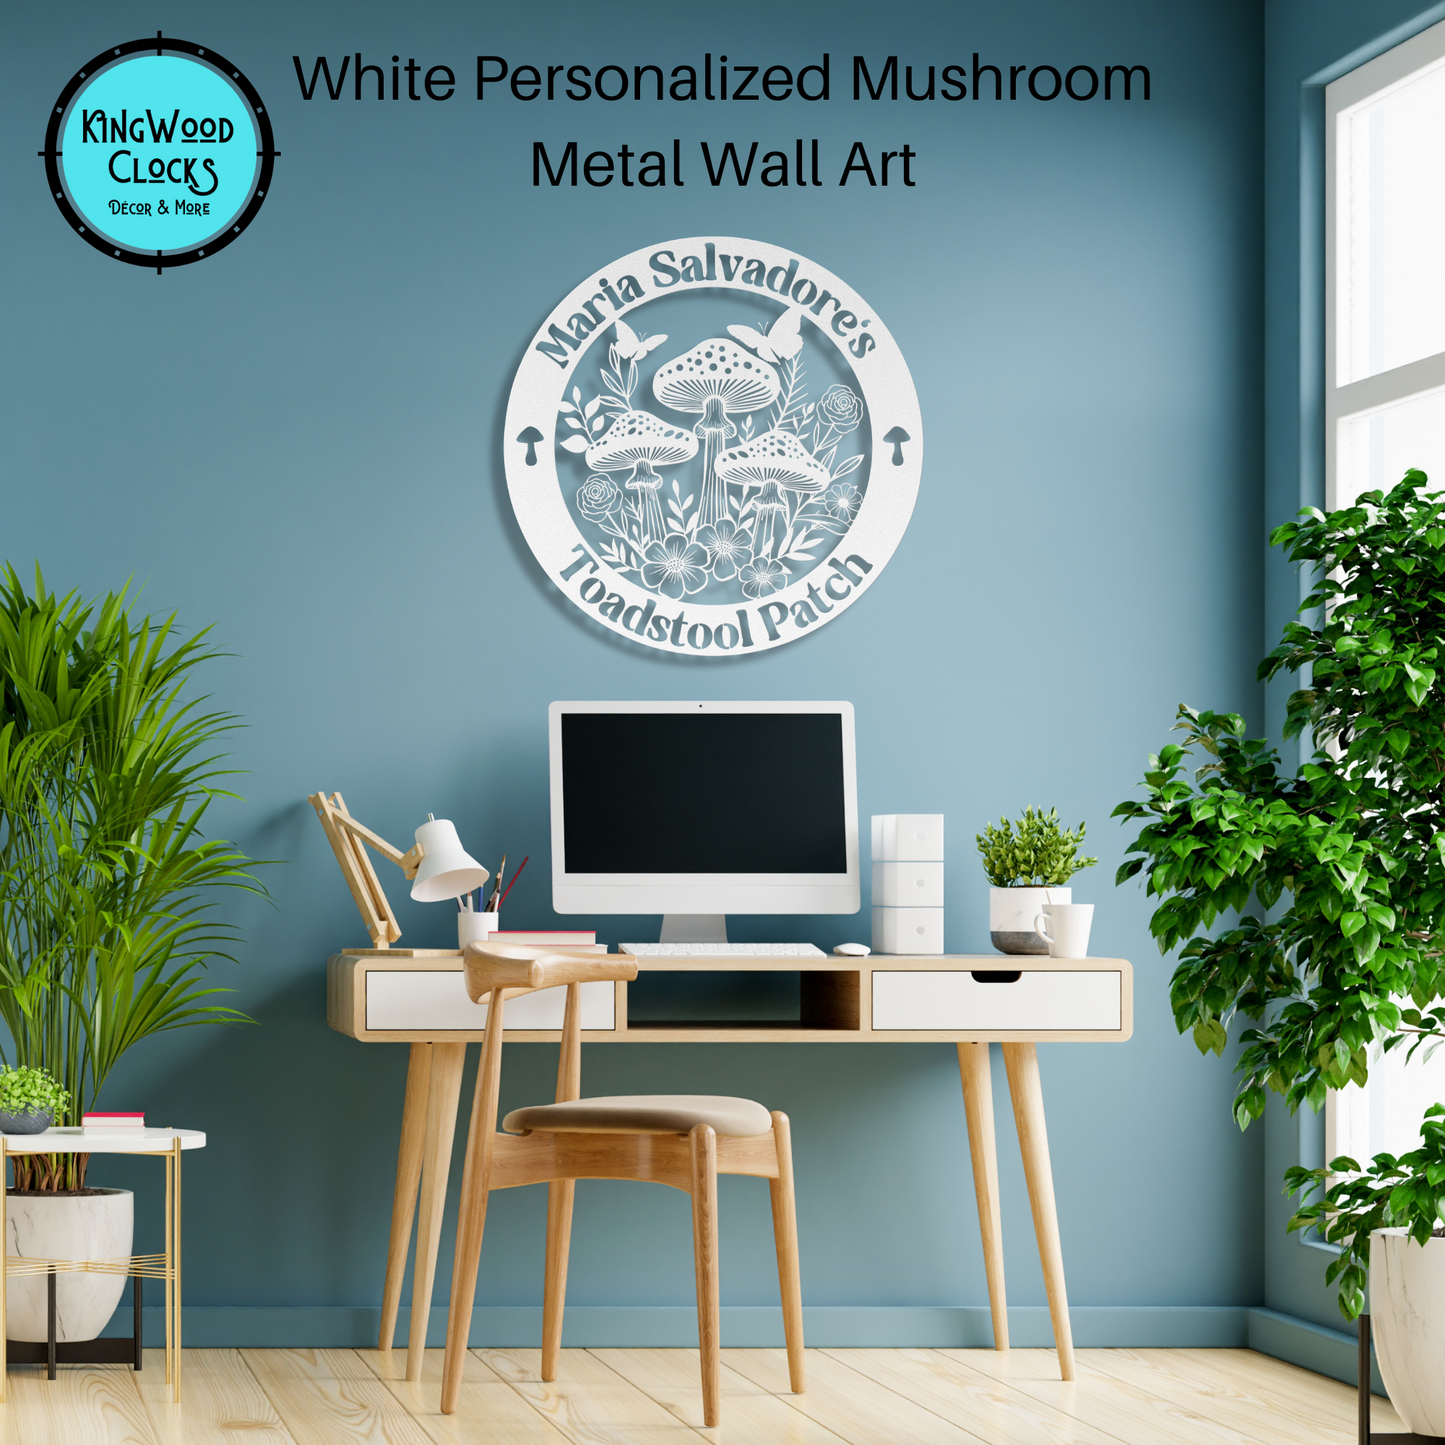 Personalized Mushroom Metal Wall Art white in office